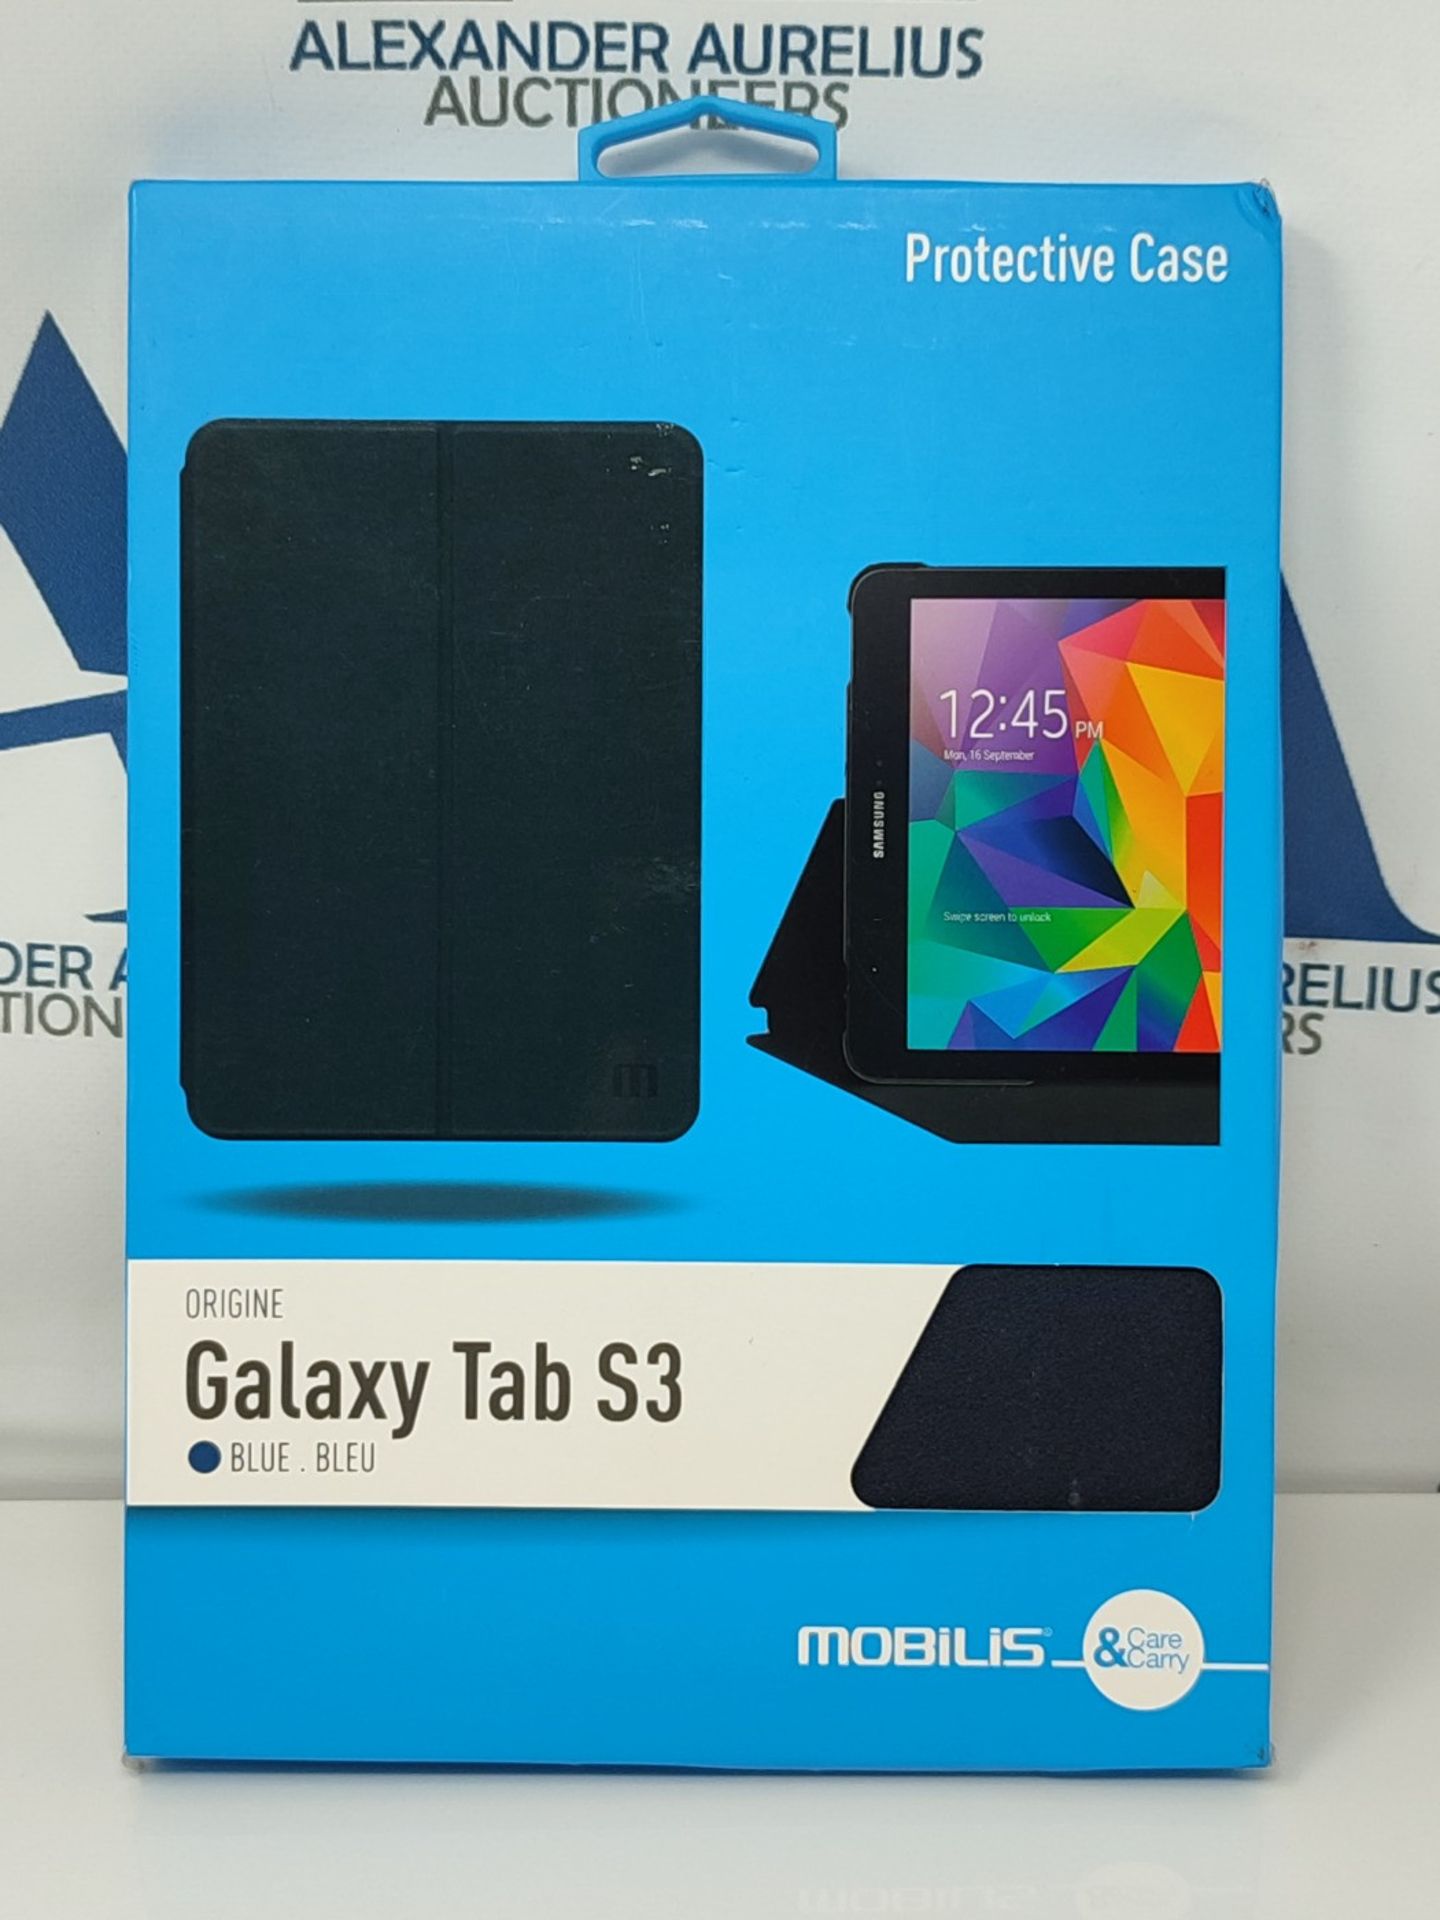 Mobilis Protective Folio Case for Samsung Galaxy Tab S3-2 Positions - Black - Image 2 of 3